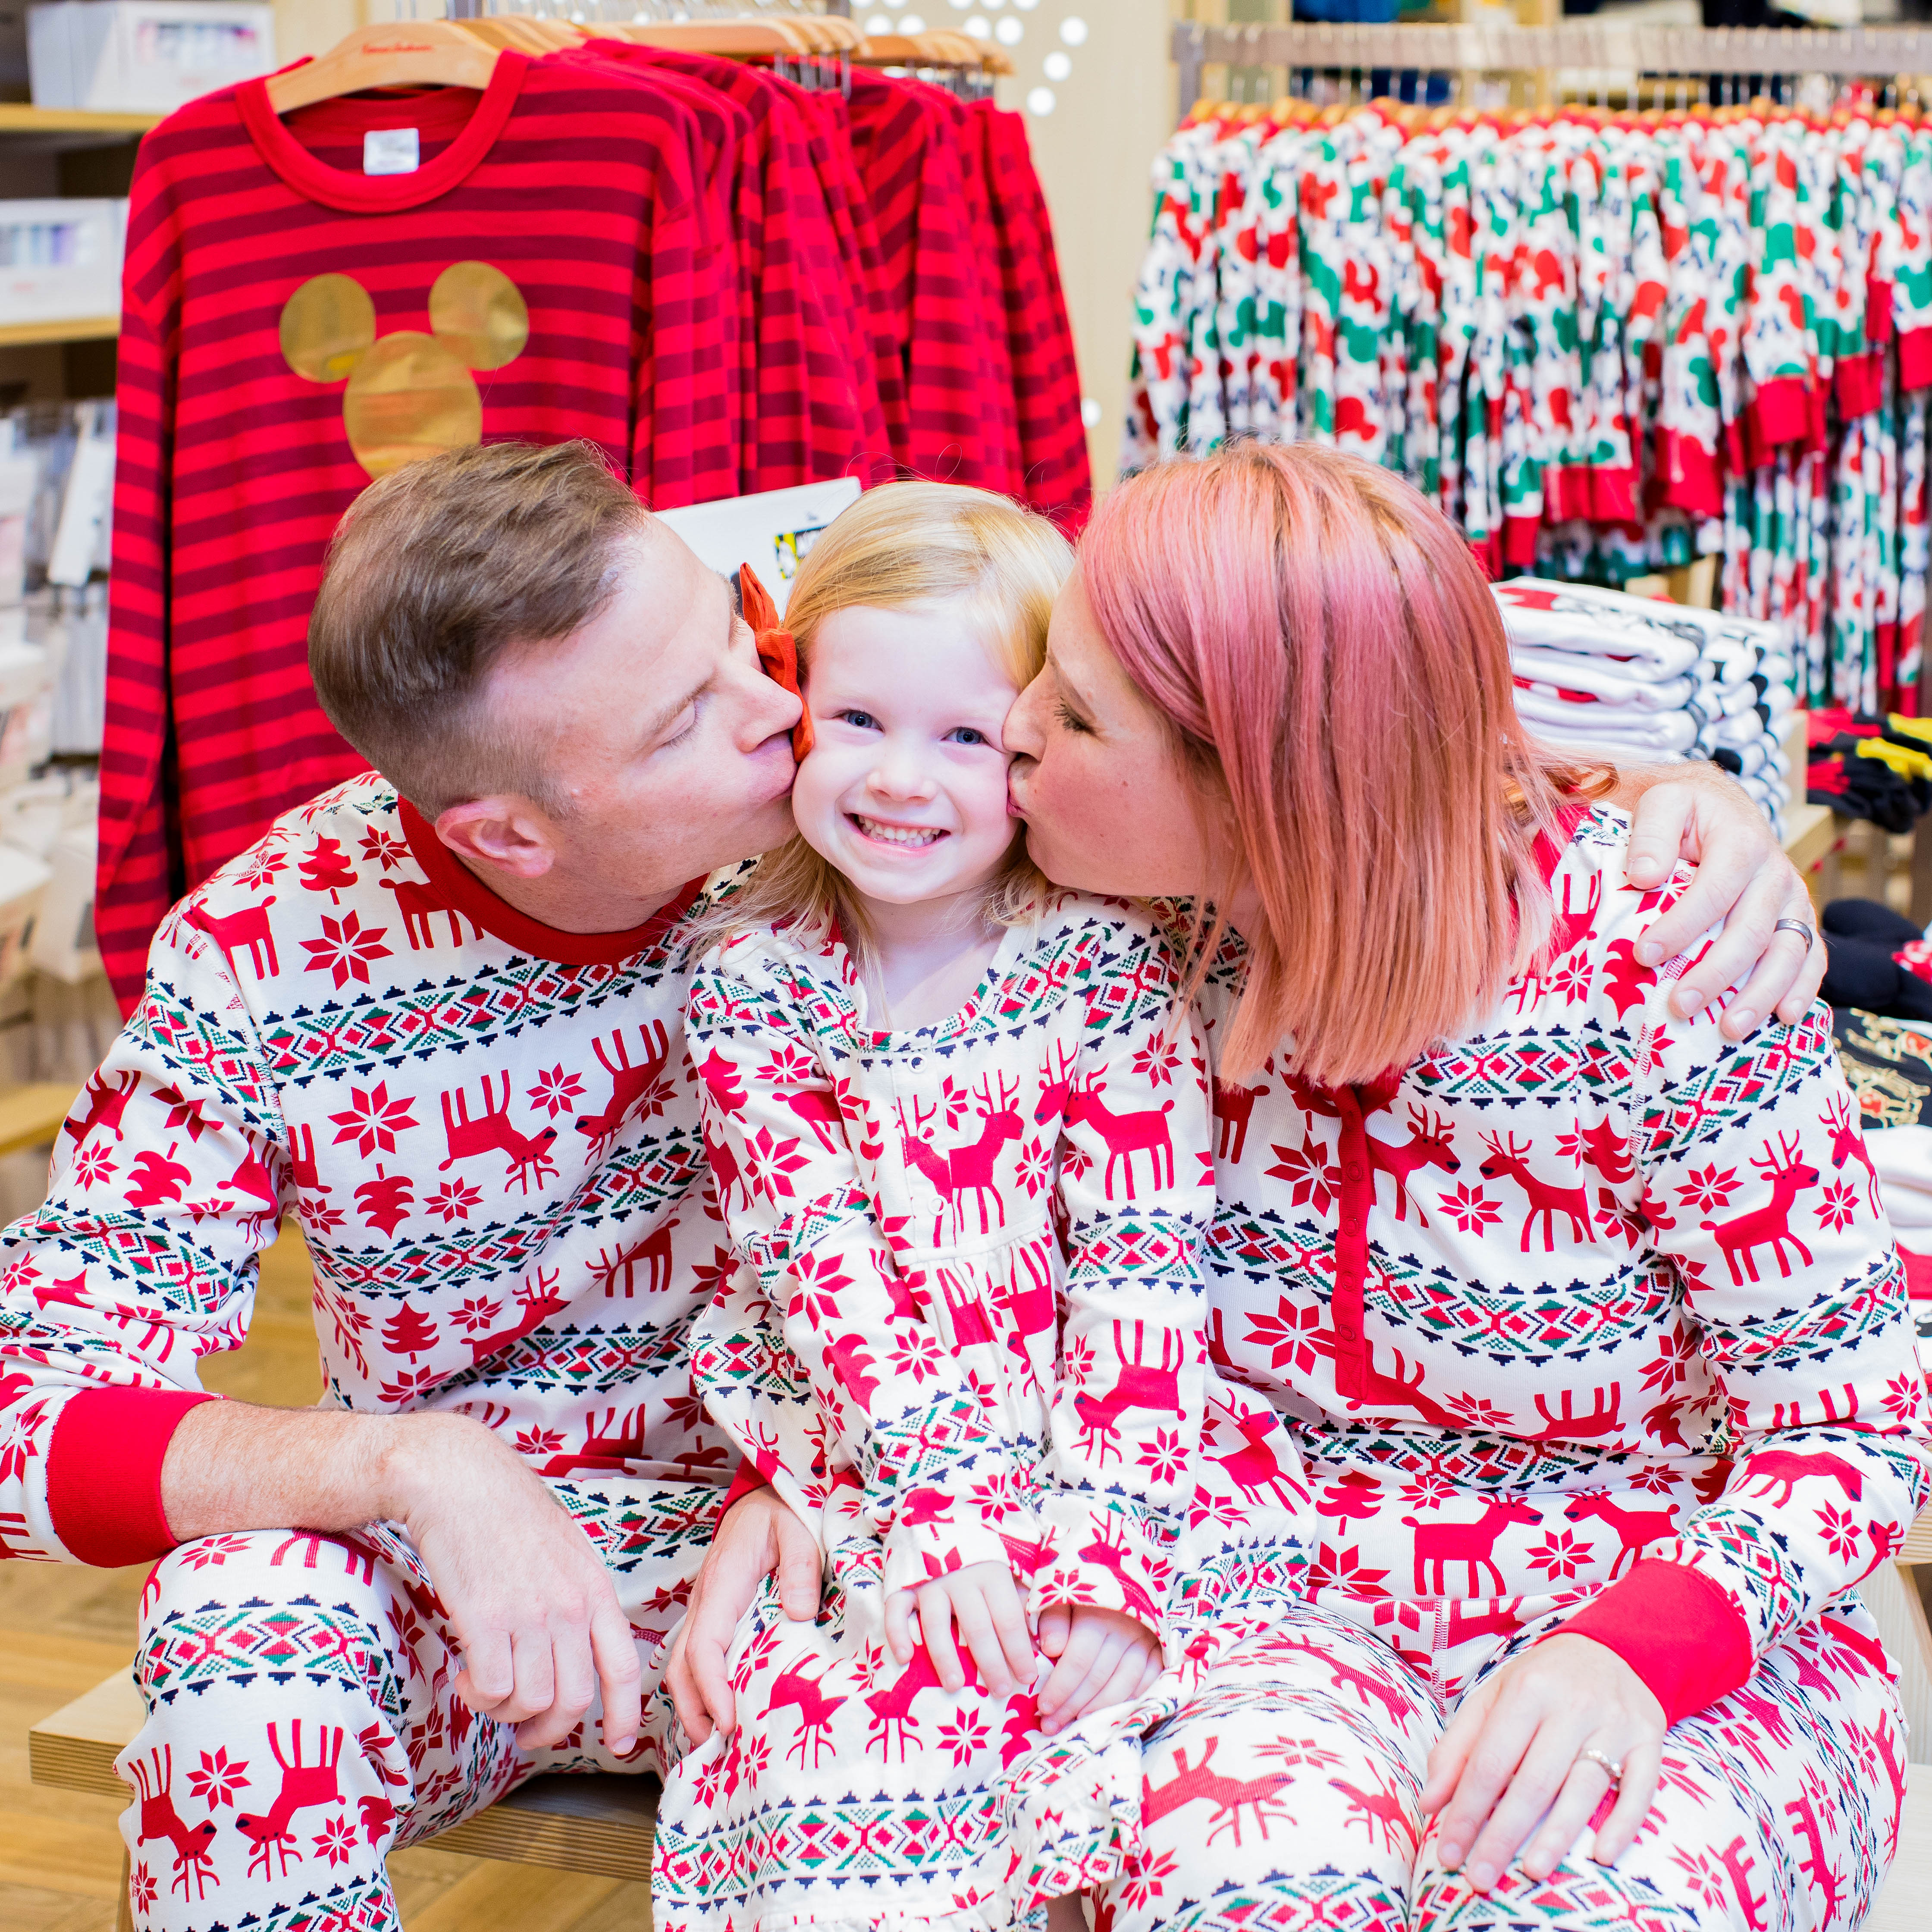 On the search for family holiday pajamas? These are some of our favorites, just in time for family photos!